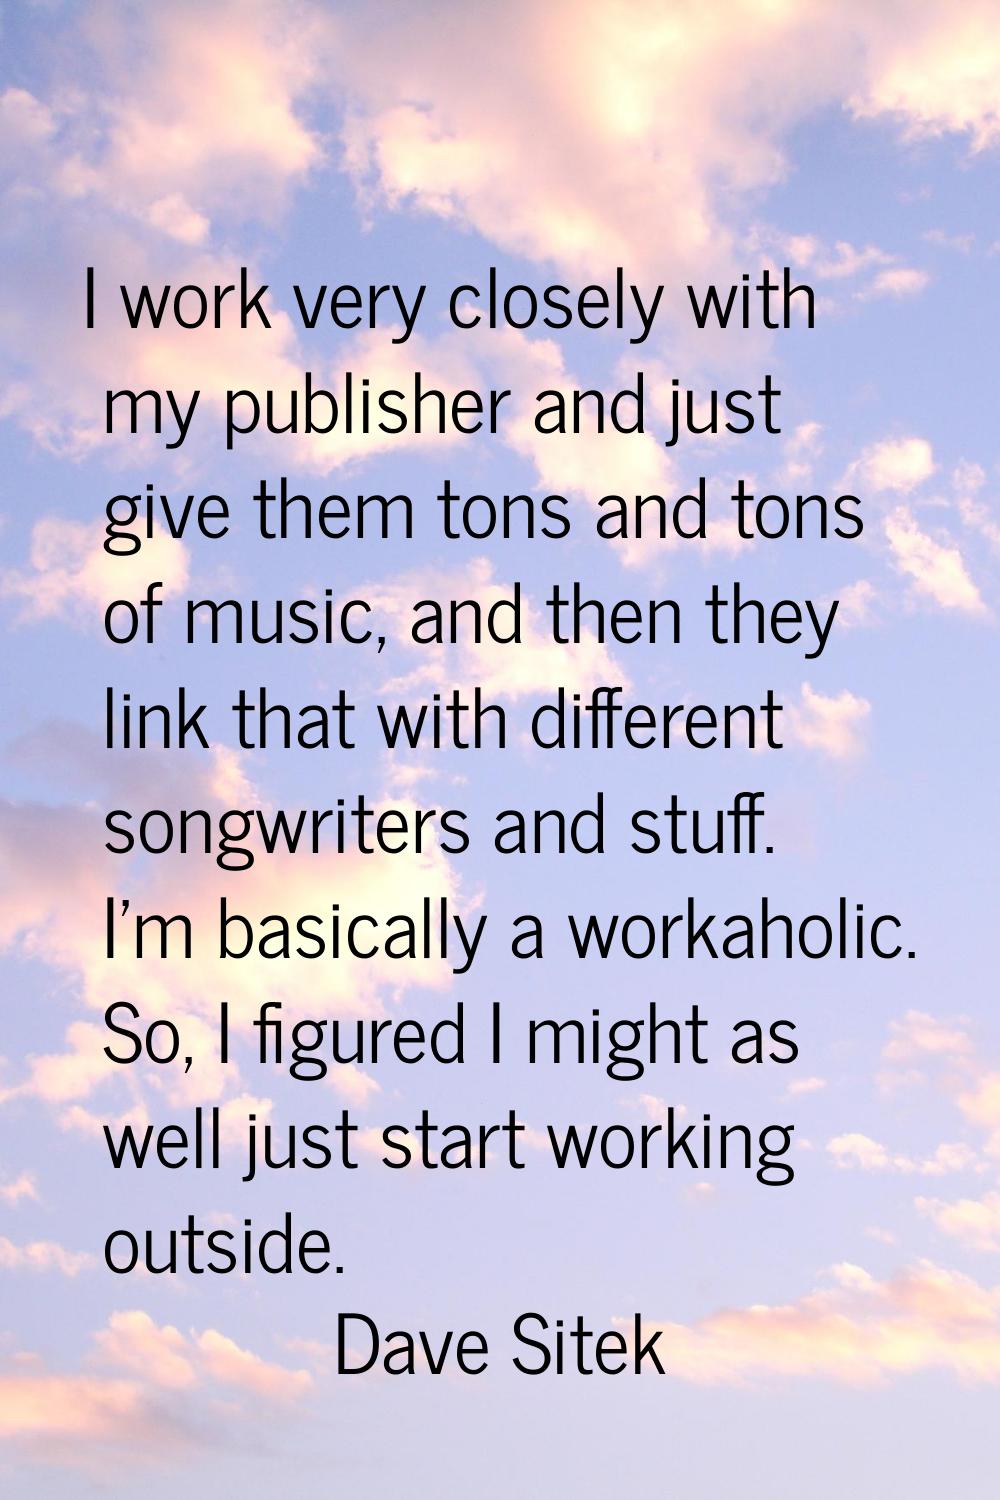 I work very closely with my publisher and just give them tons and tons of music, and then they link